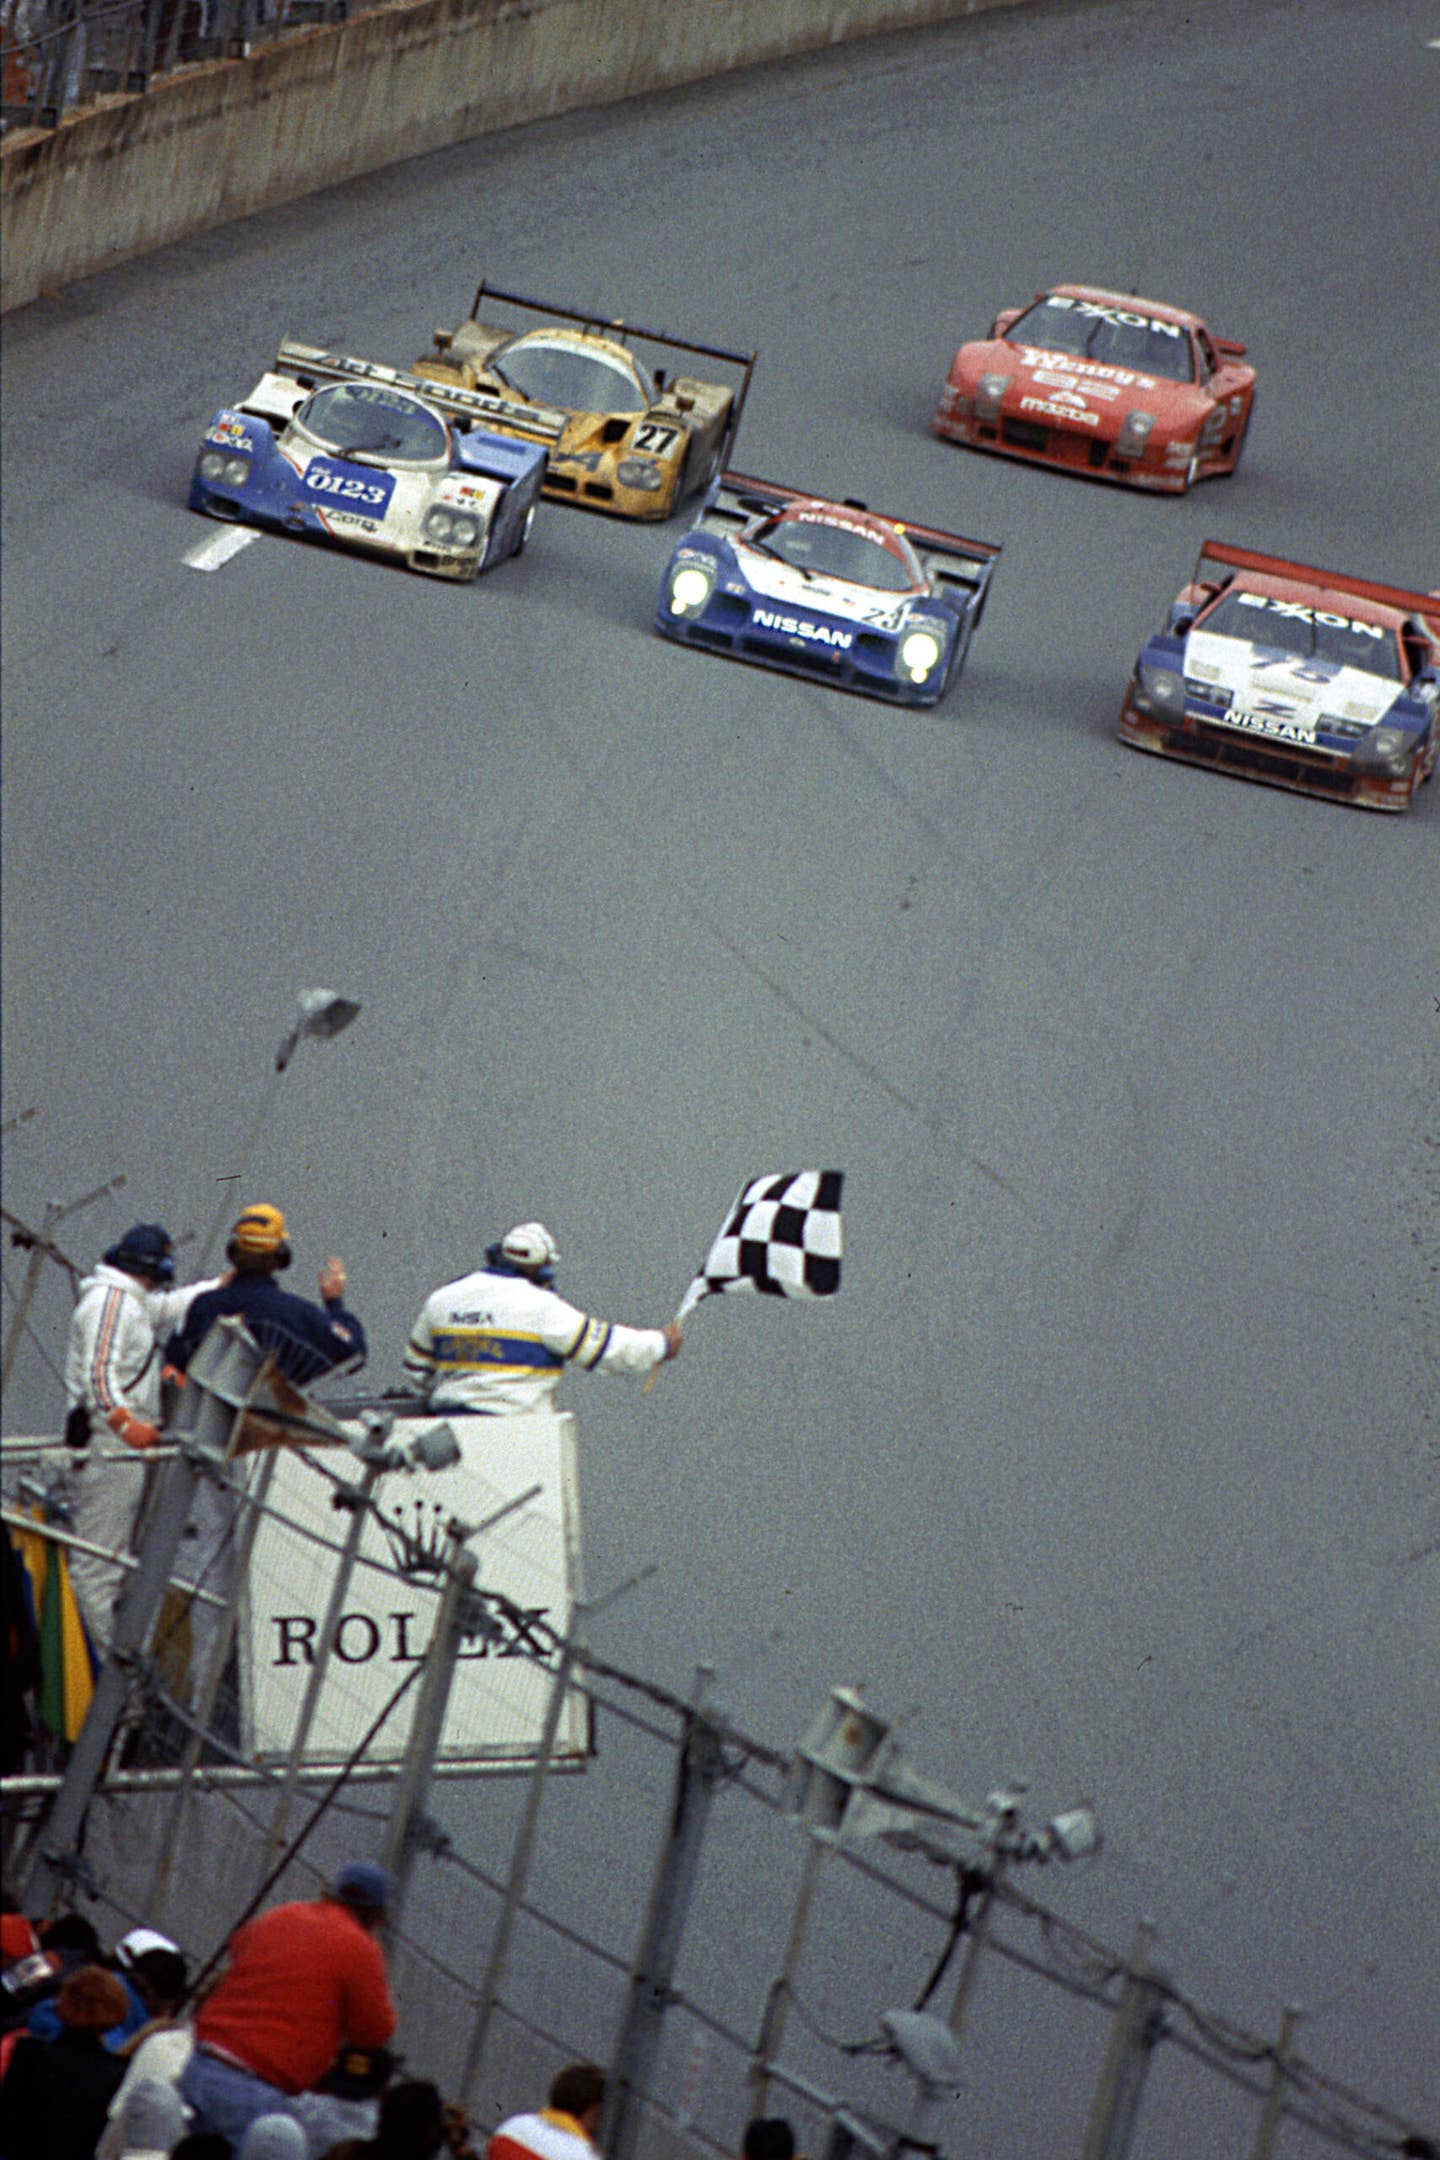 DAYTONA BEACH, FL — February 2, 1992:  At Daytona International Speedway, the winning Nissan R91-CP is sandwiched between two other competitors as the checkered flag falls to end the Rolex 24 at Daytona.  Masahiro Hasemi, Kazuyoshi Hoshino and Toshio Suzuki took the victory racing for Nissan Motorsports of Japan.  (Photo by ISC Images and Archives via Getty Images)